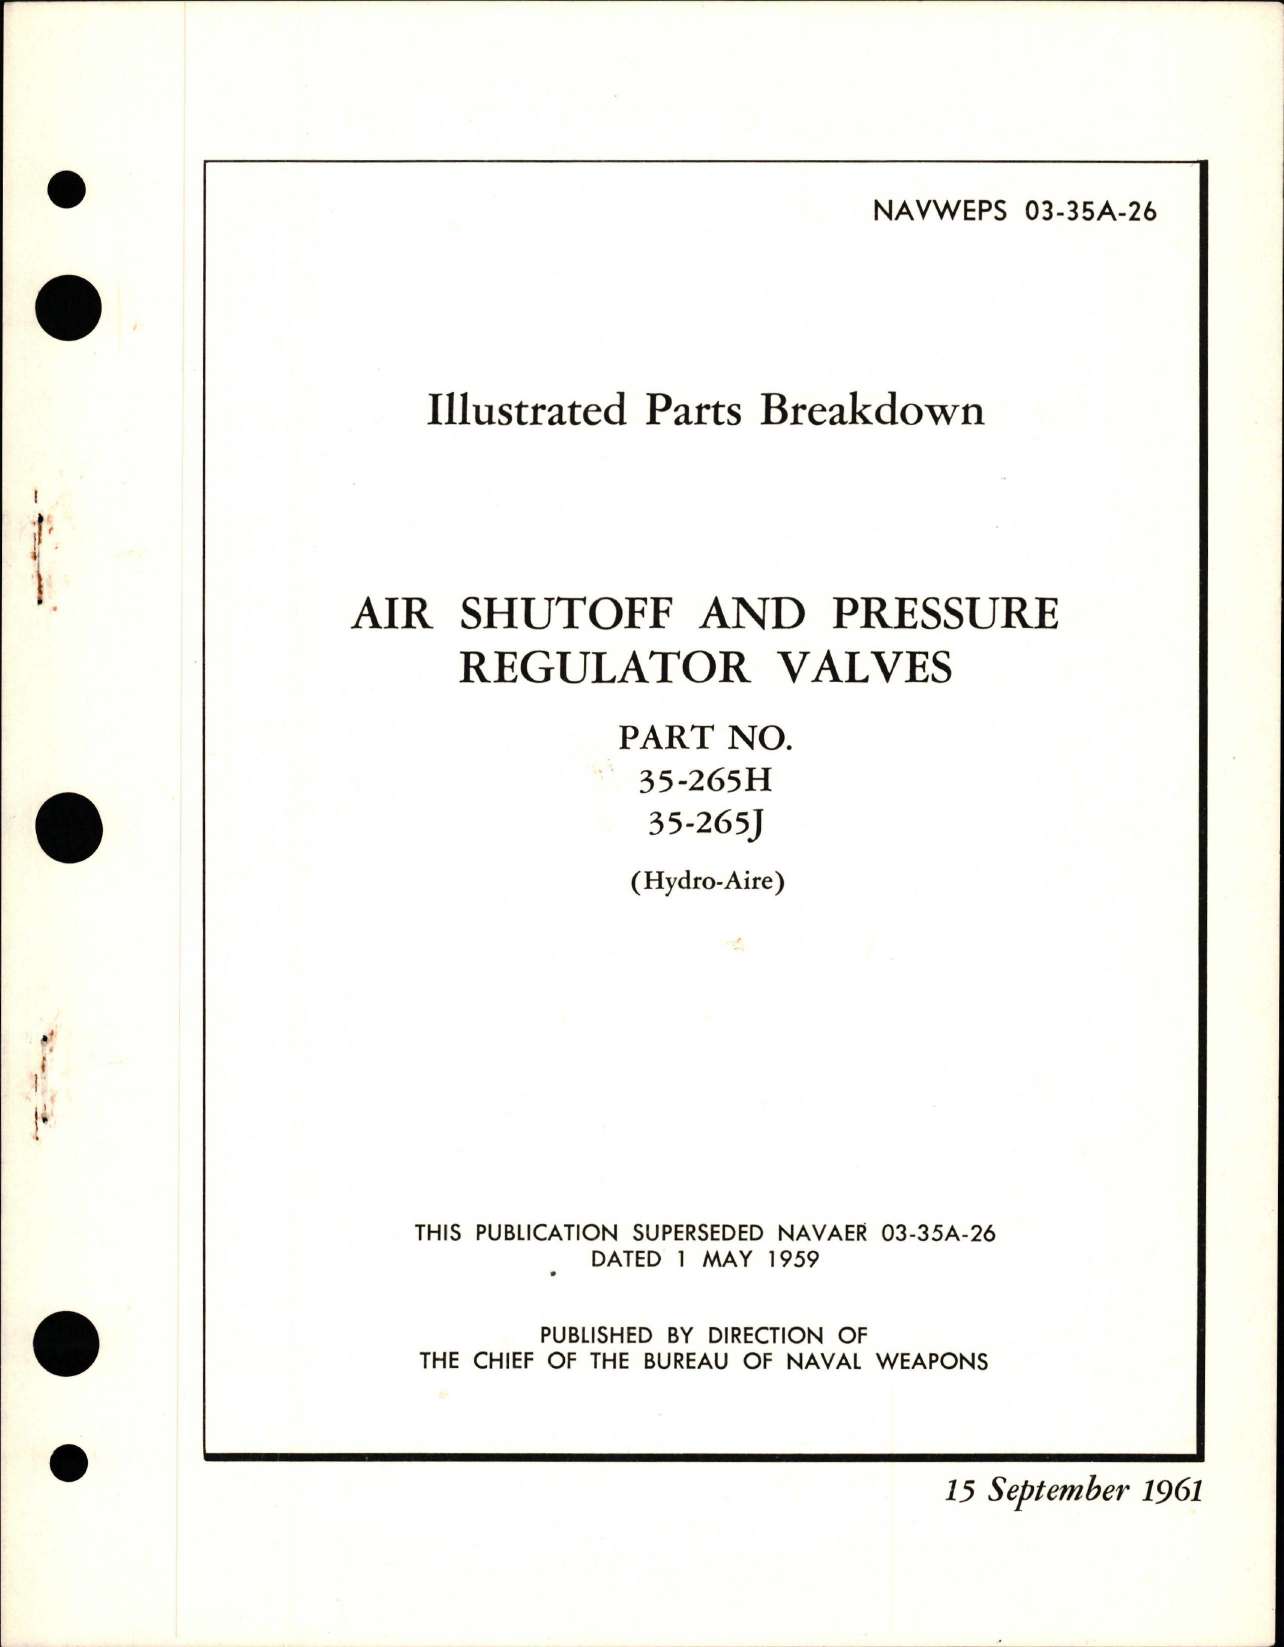 Sample page 1 from AirCorps Library document: Illustrated Parts Breakdown for Air Shutoff and Pressure Regulator Valves - Parts 35-265H, and 35-265J